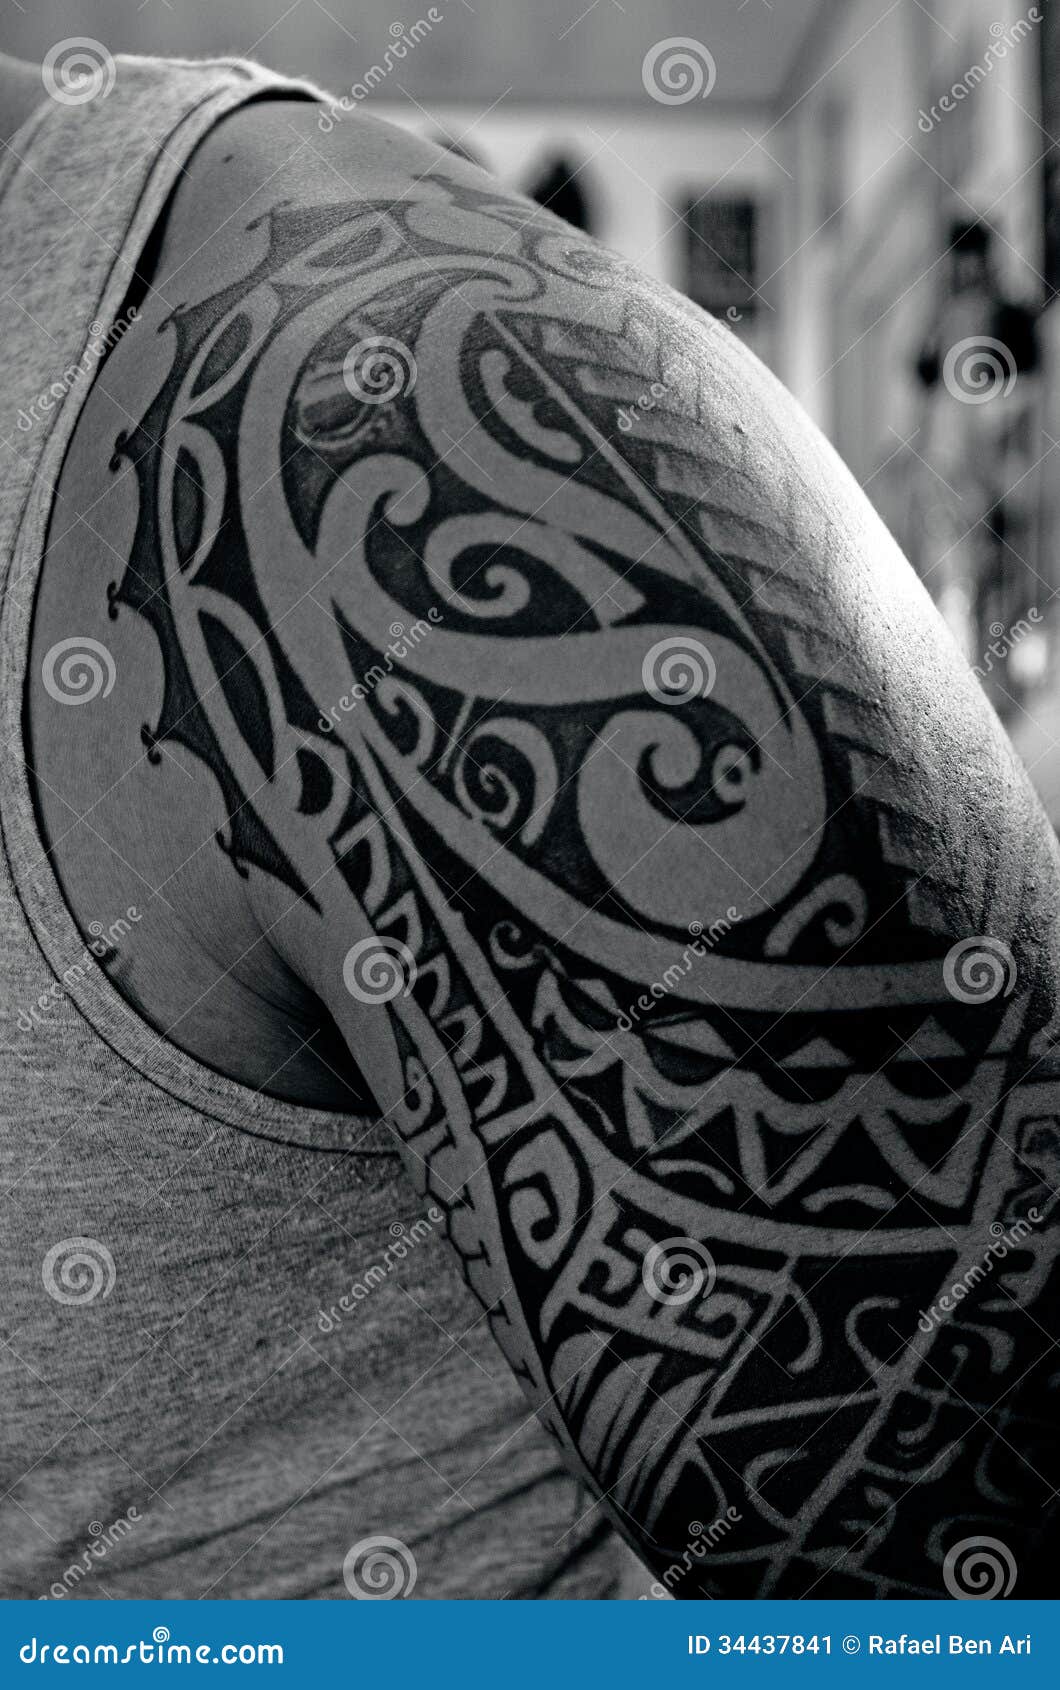 1,952 Camera Tattoos Designs Royalty-Free Photos and Stock Images |  Shutterstock